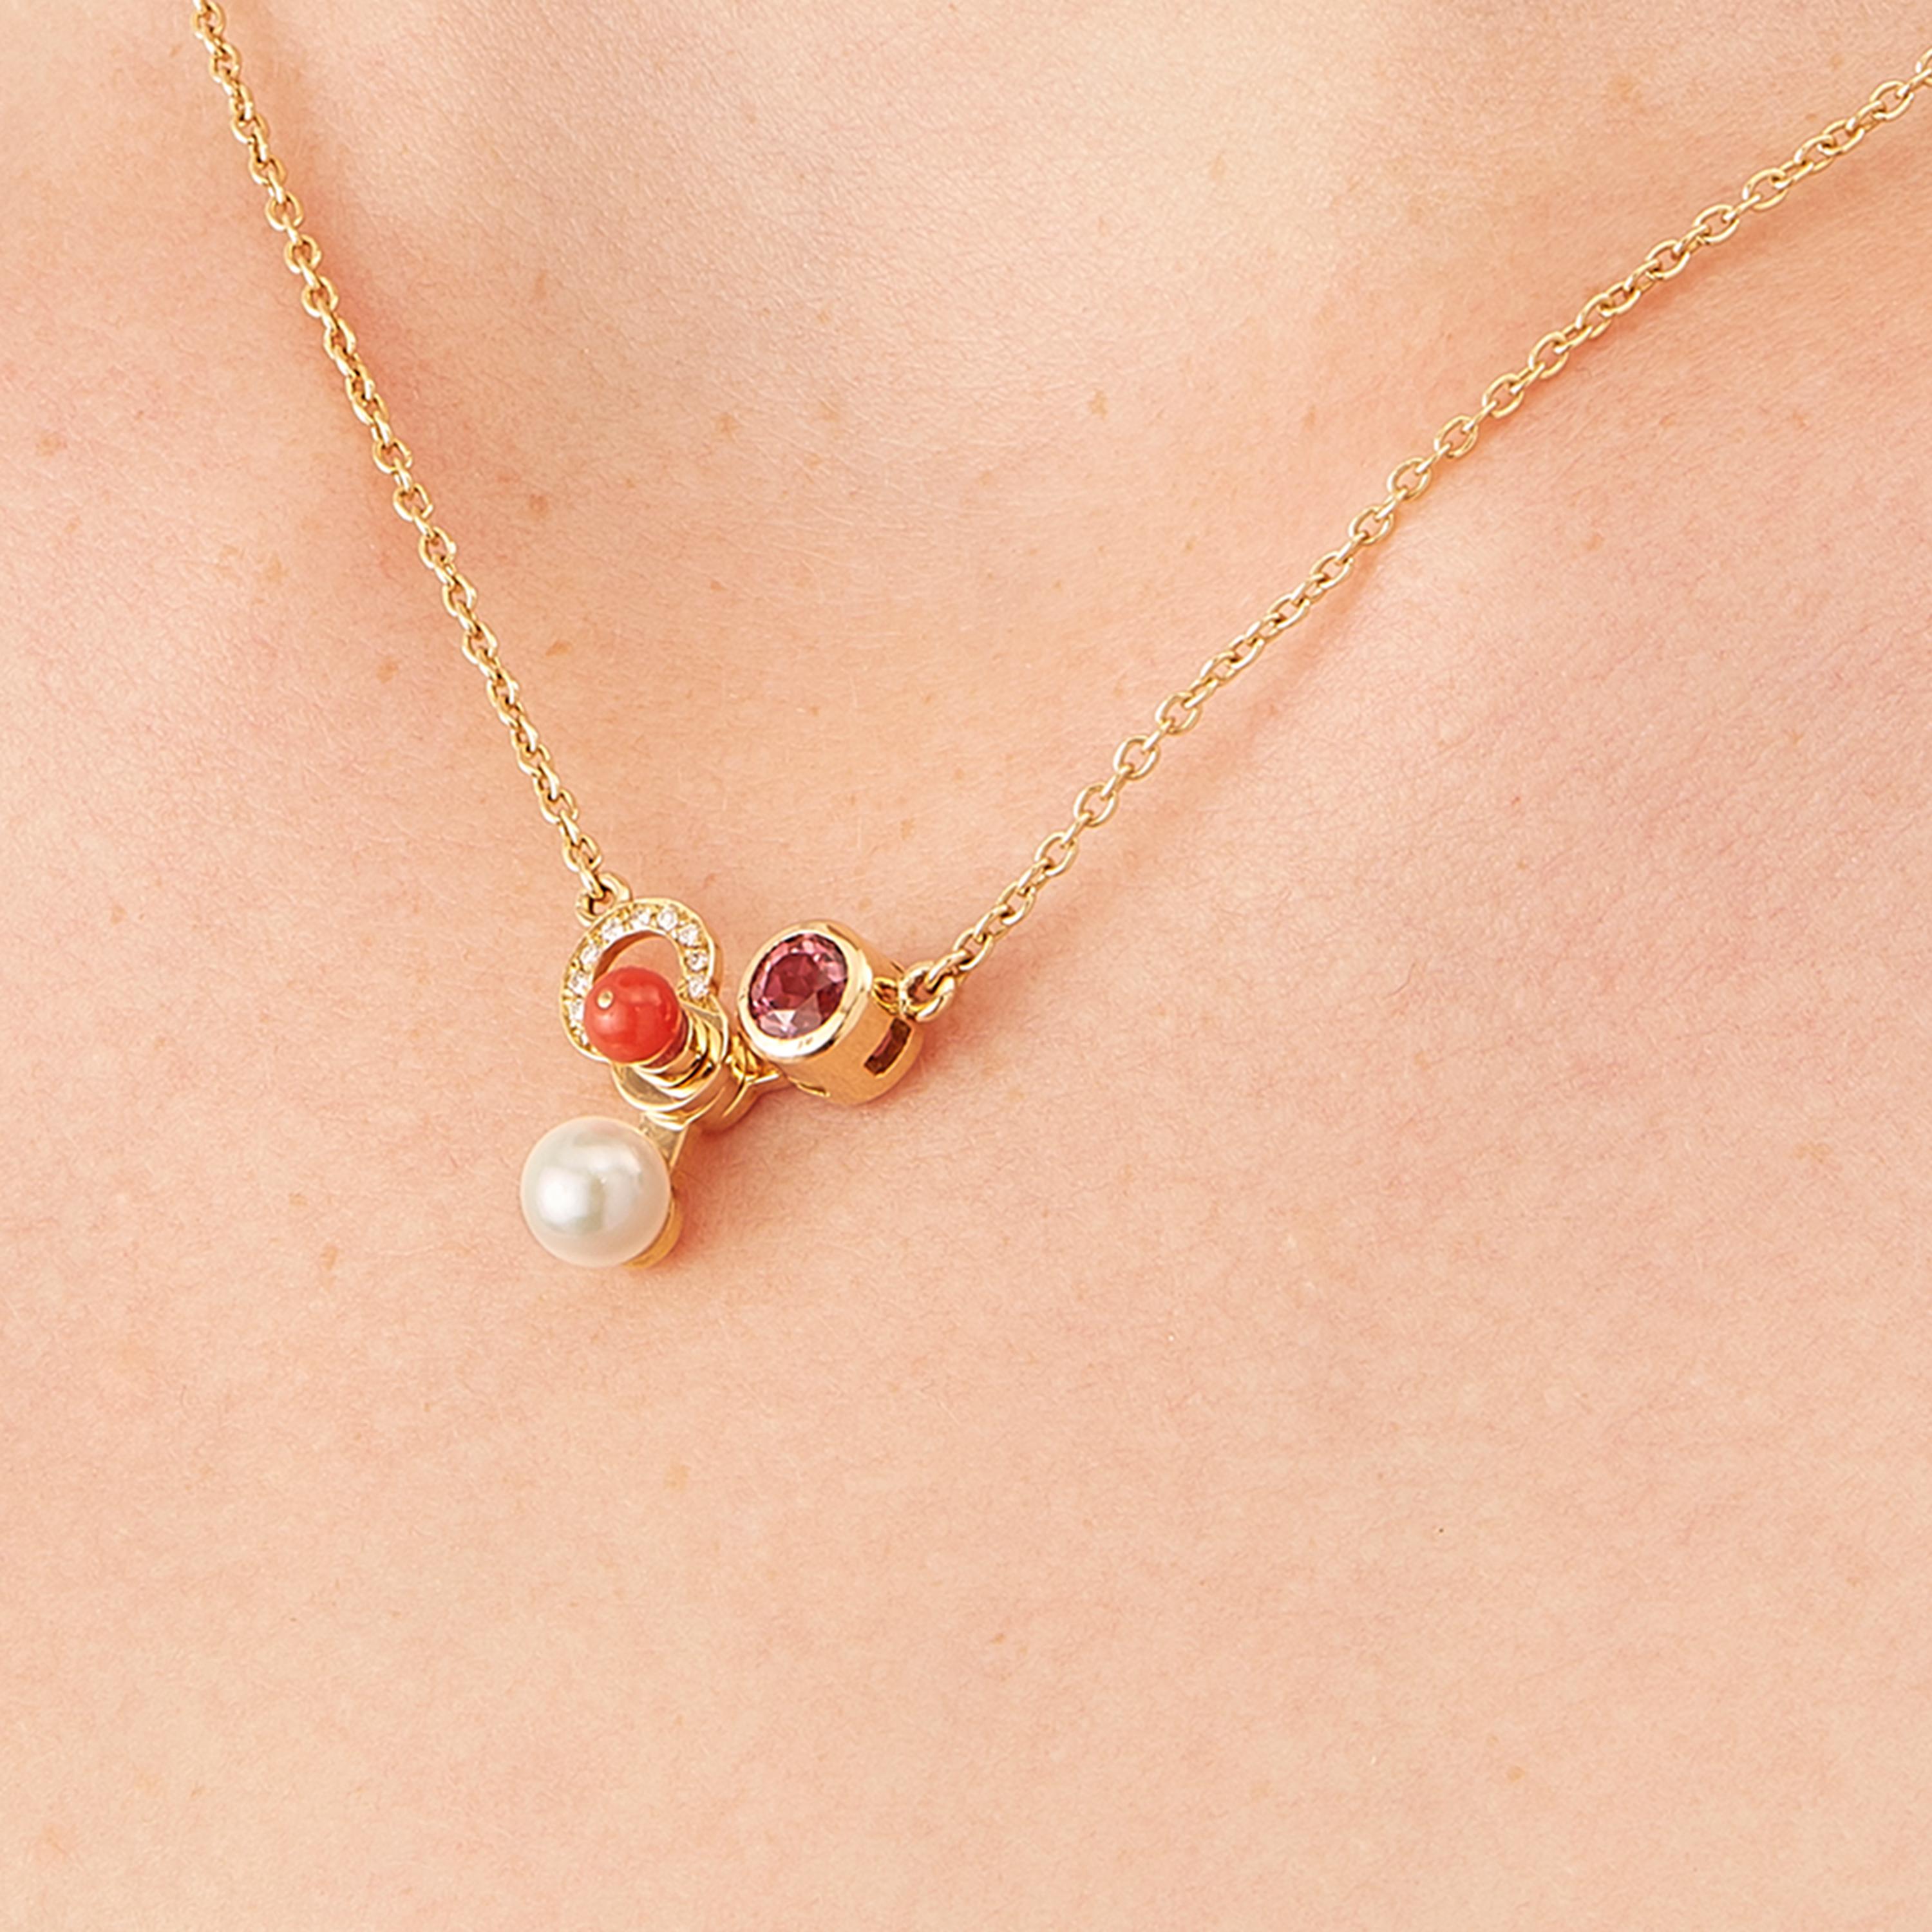 Nathalie Jean Diamond Tourmaline Pearl Carnelian Gold Pendant Necklace In New Condition For Sale In Milan, Lombardia